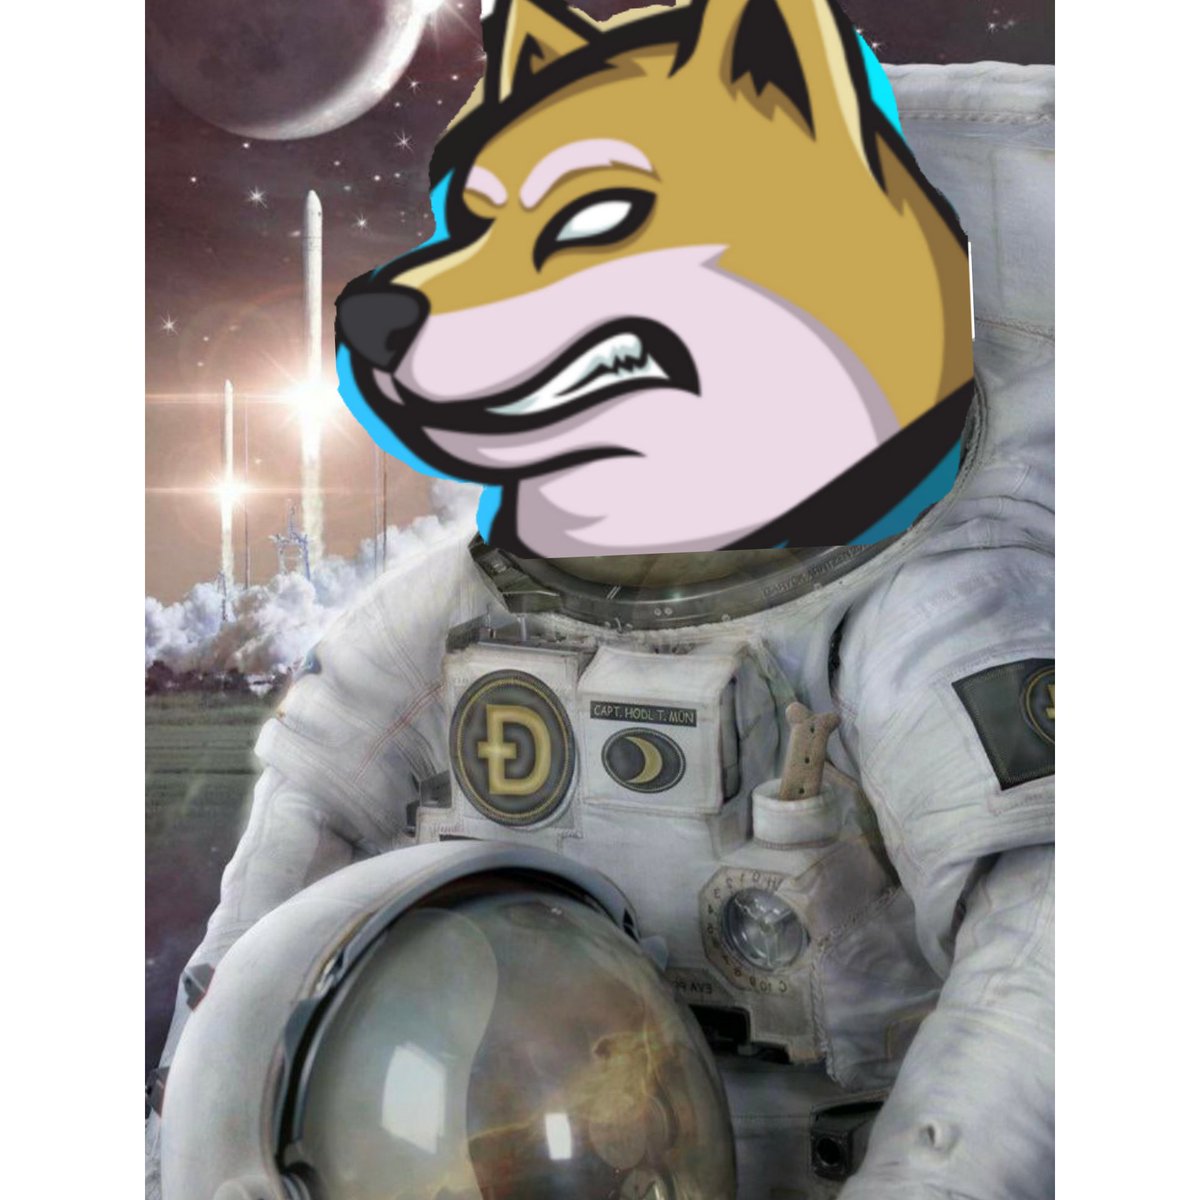 SO MUCH HAPPENING THIS WEEK, IM PACKING FOR THE MOON!!!!! 

@Doge2_Official 

#doge2 #shib #floki #amc #xrp #btc #bnb #eth #coin #token #island #dogecoin #ath #trading #currency #invest #meme #nft #gaming #stocks#crypto #market #trading #shill #alt #token #money #community https://t.co/0RvQlo17Jo